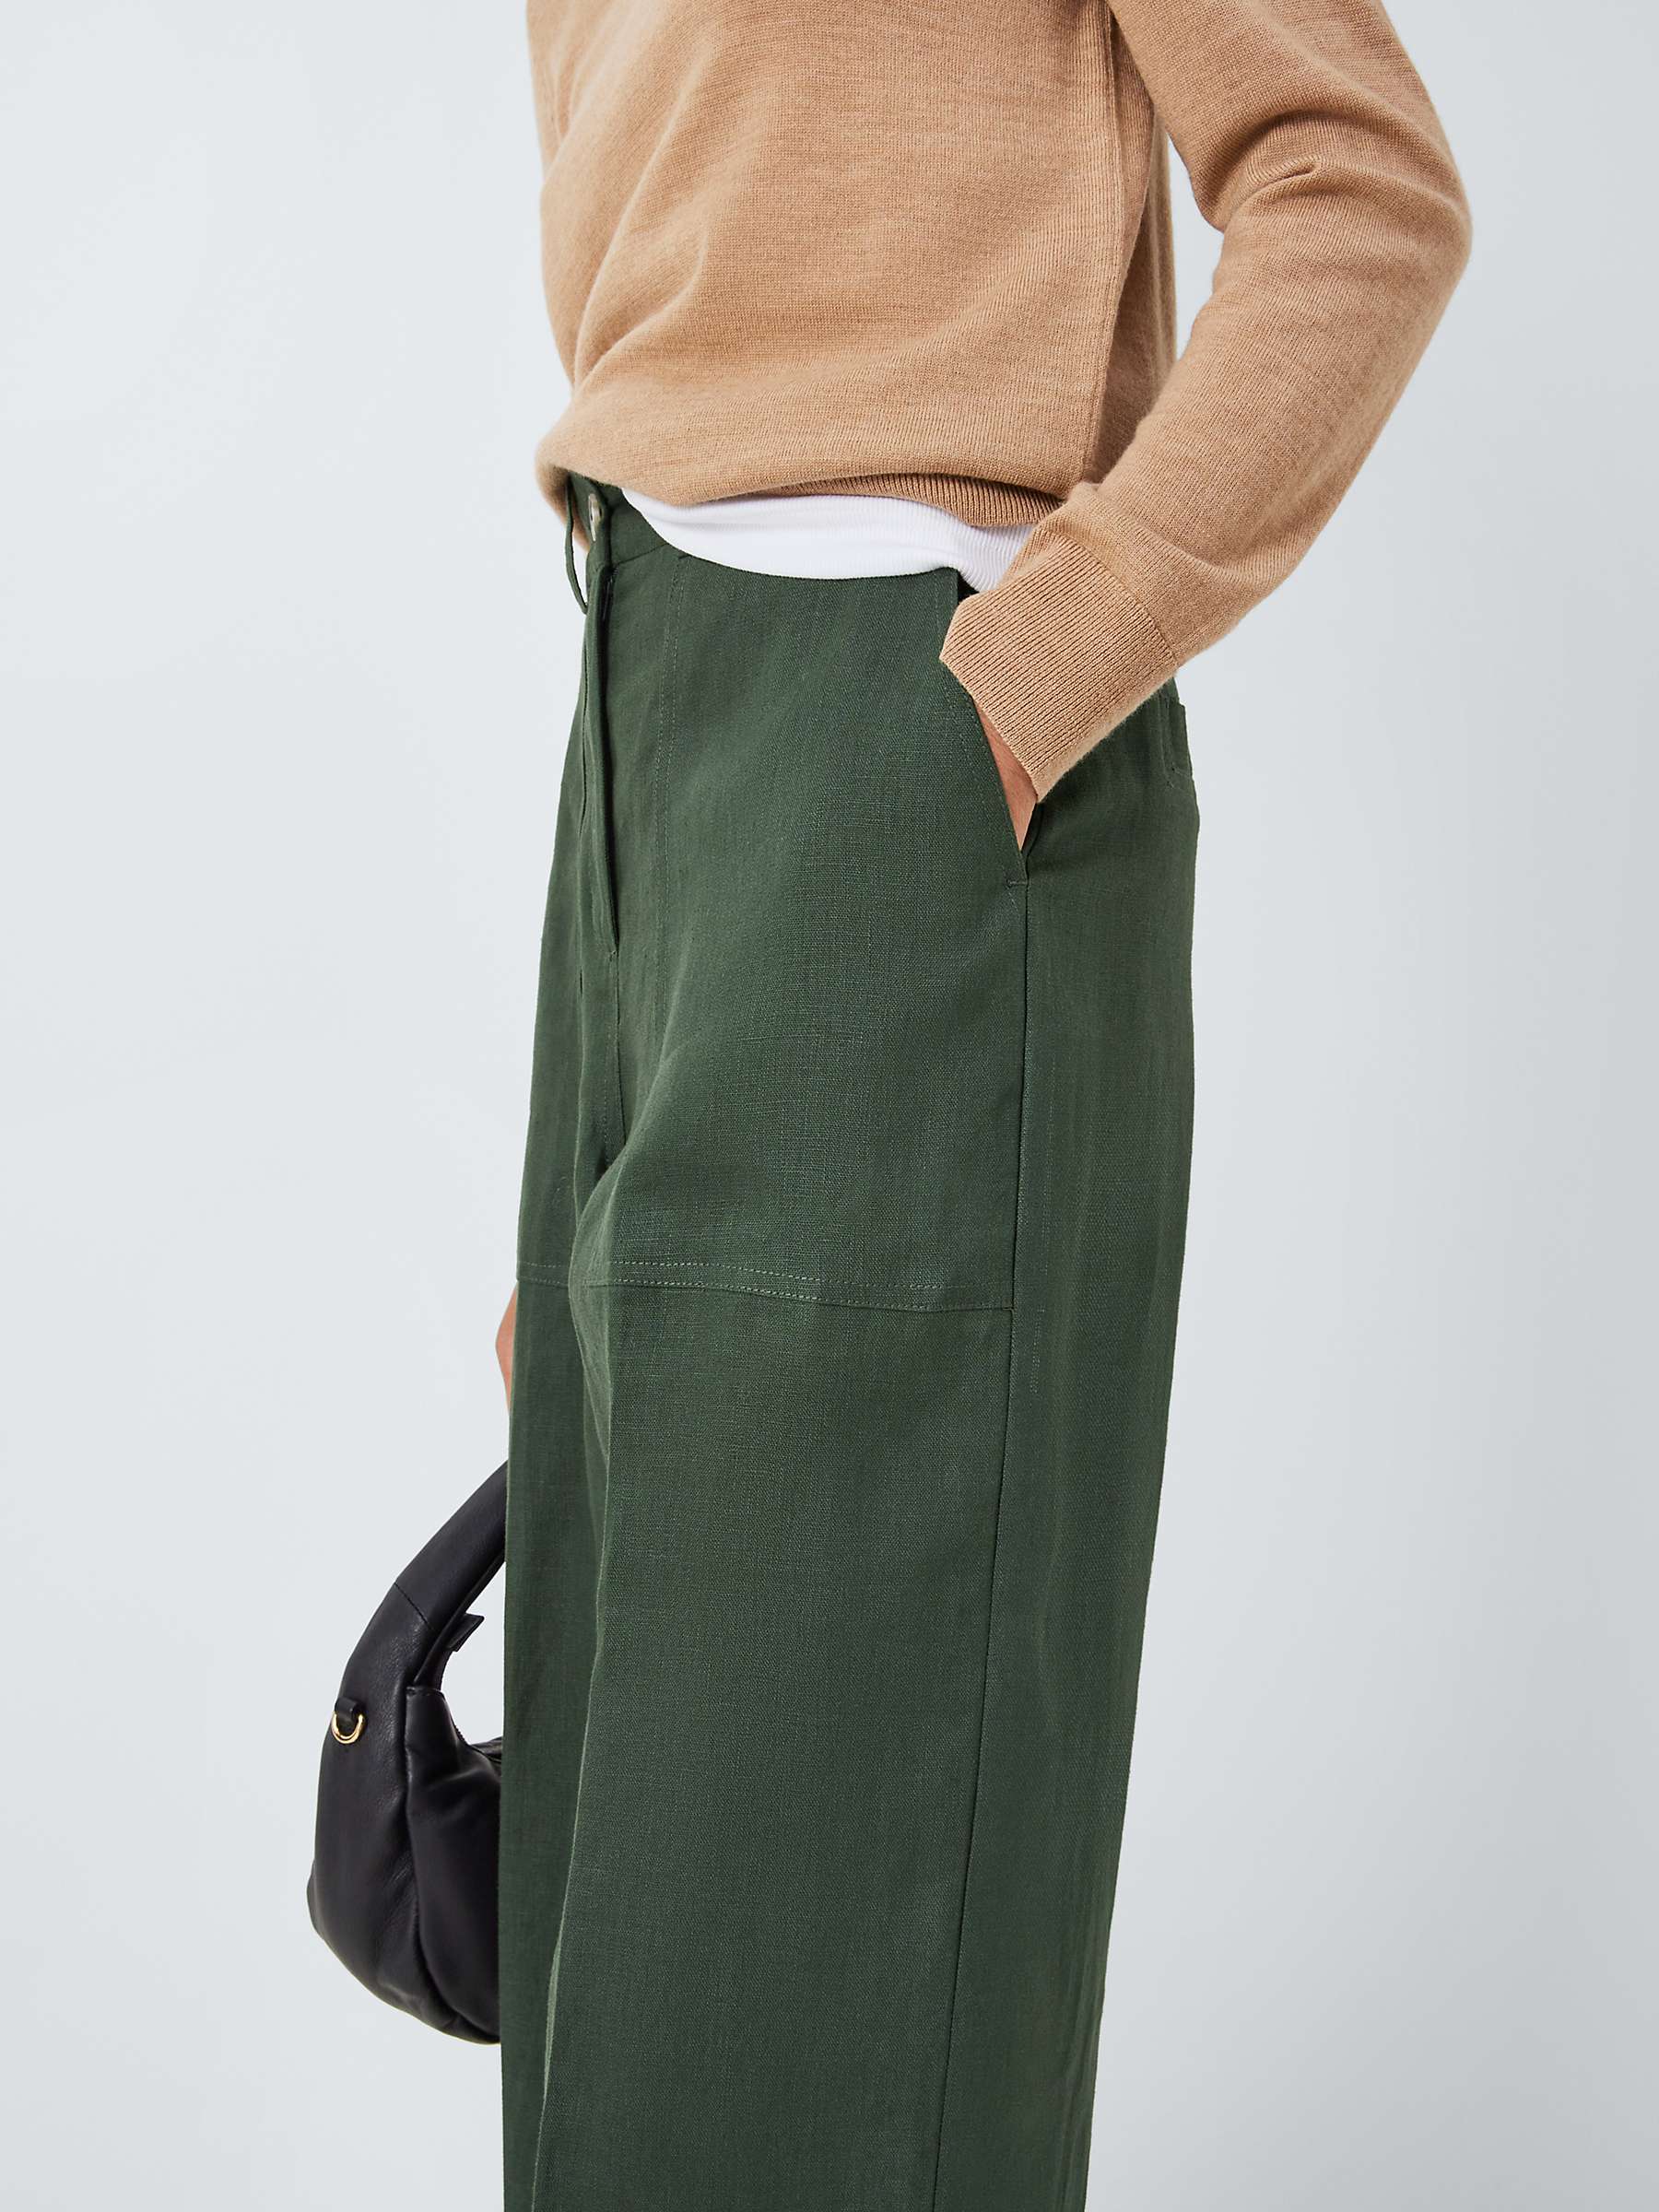 Buy John Lewis Cropped Linen Trousers Online at johnlewis.com